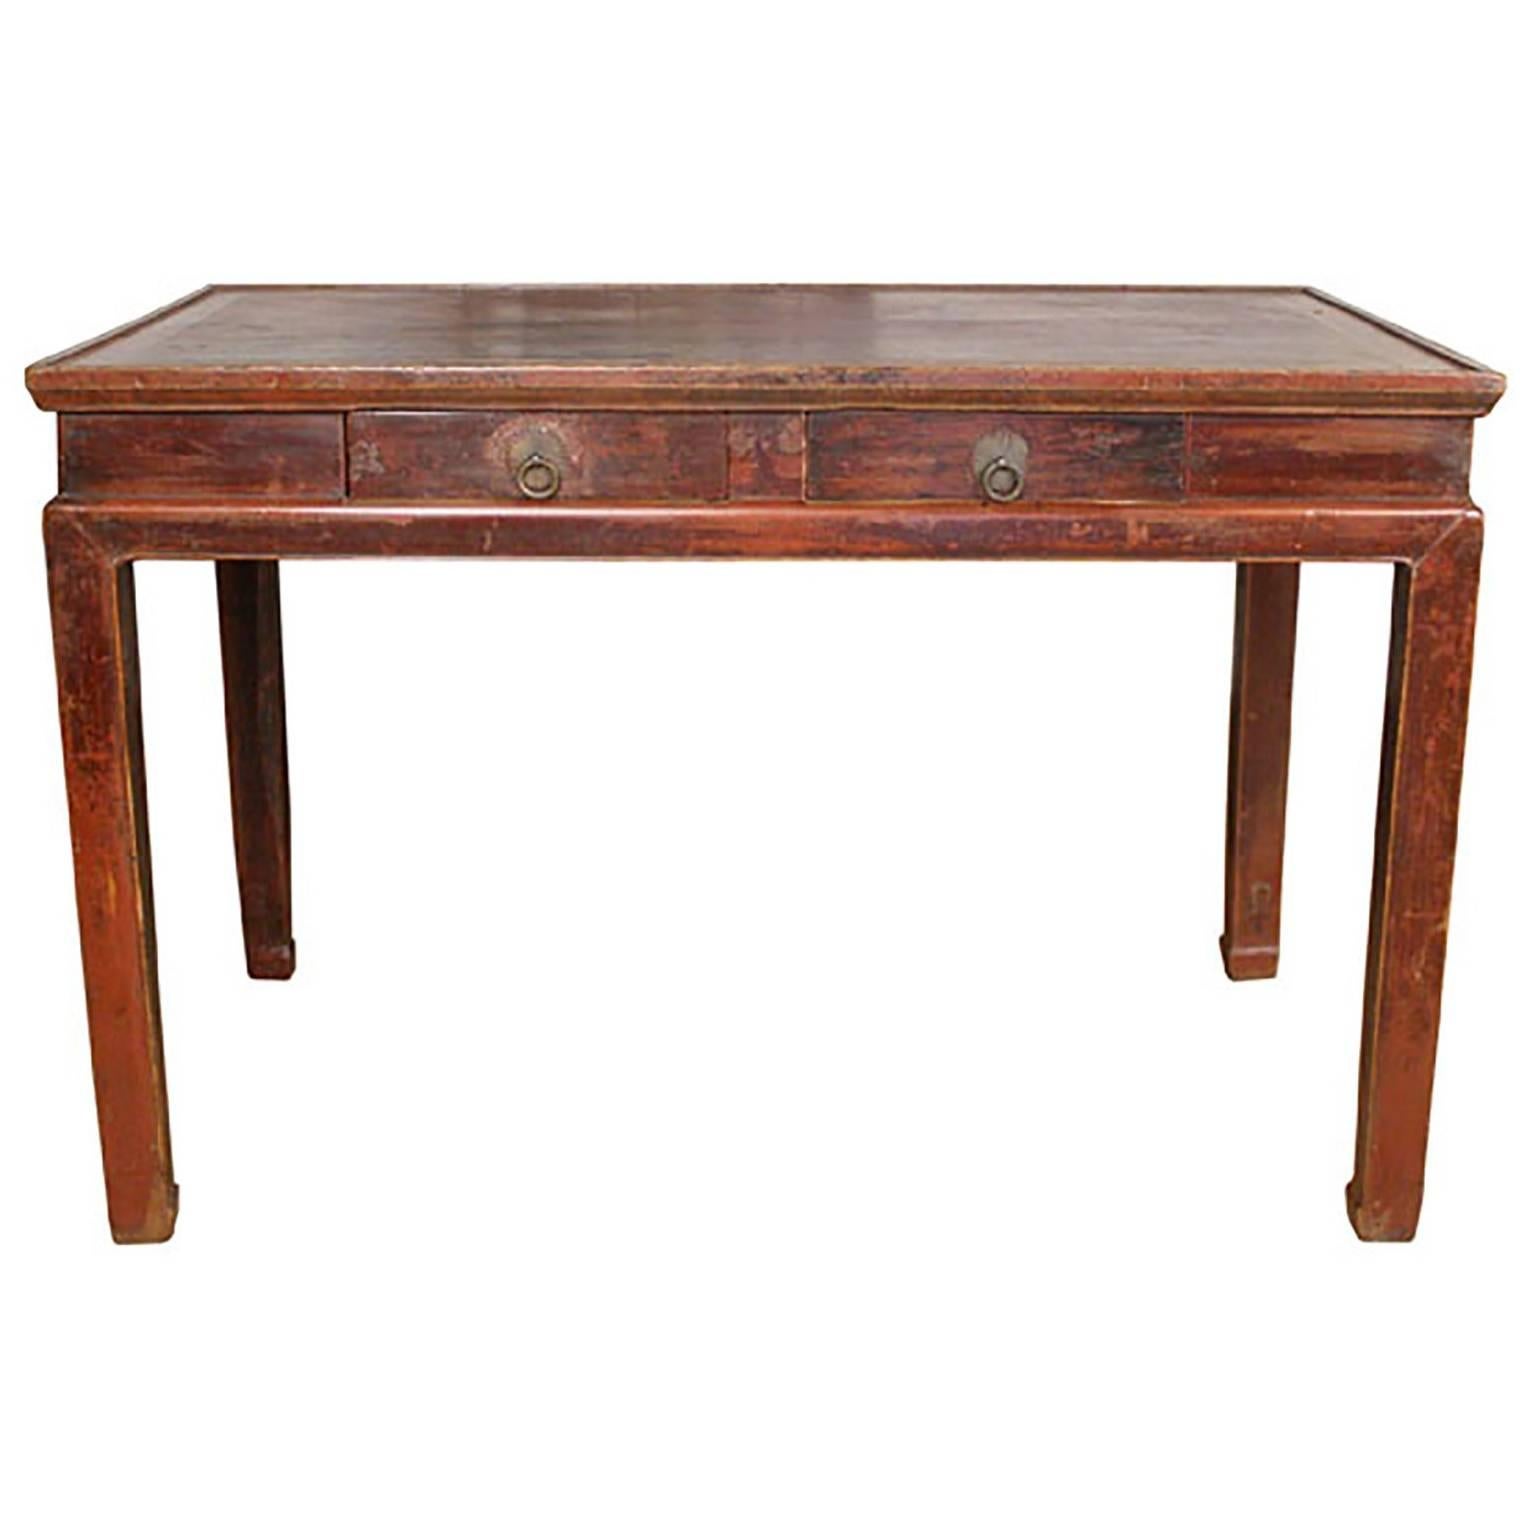 Early 20th Century Chinese Lacquered Desk